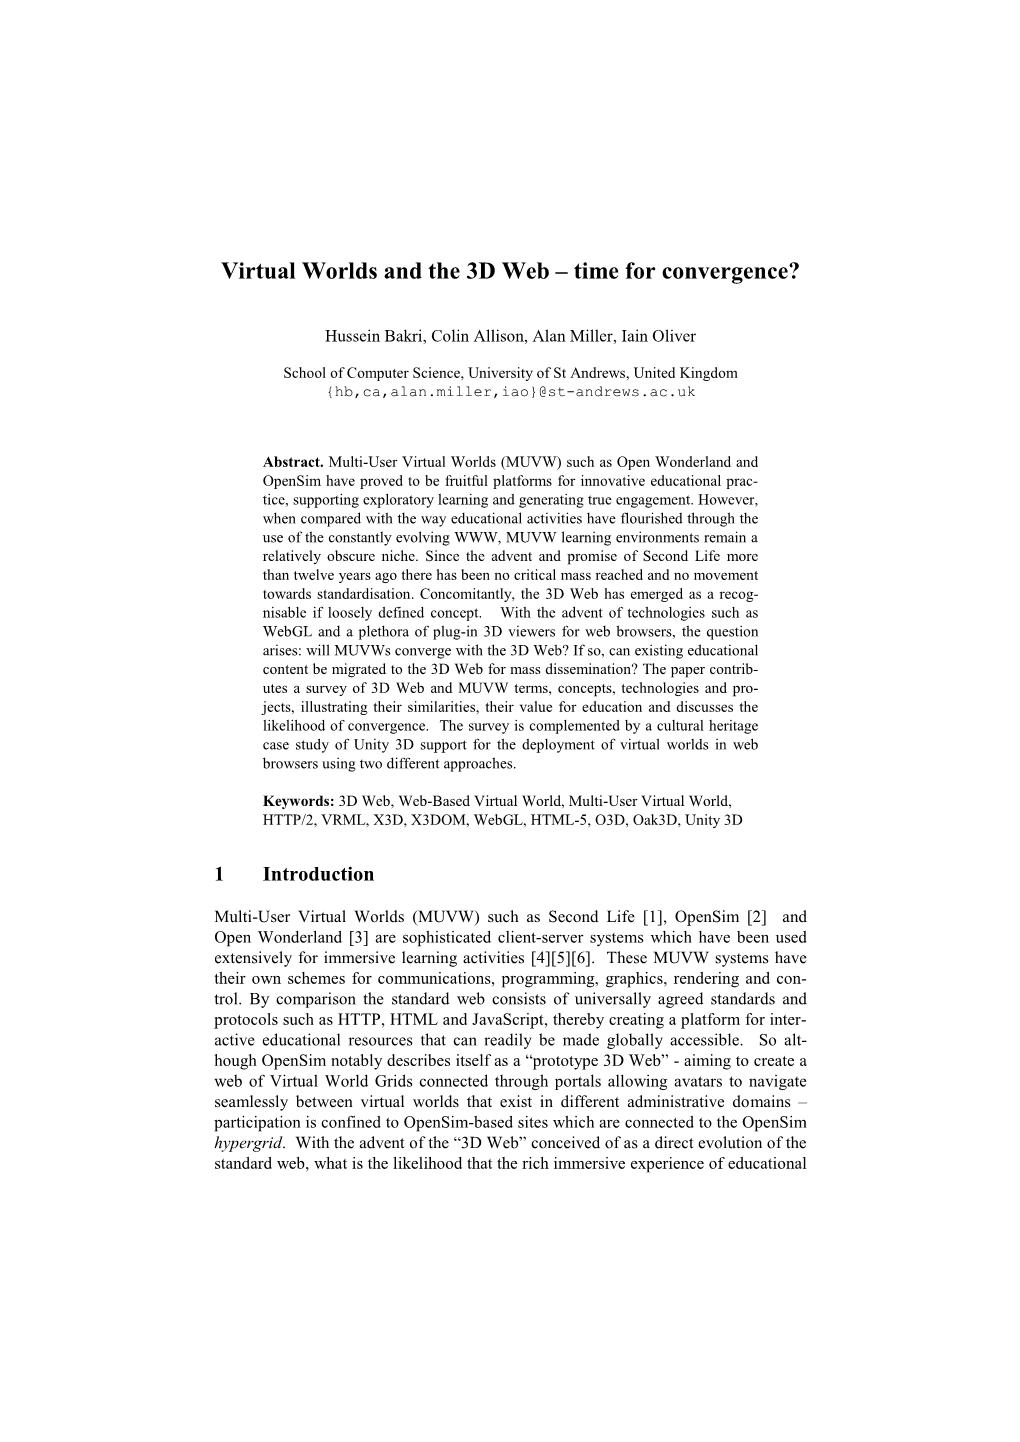 Virtual Worlds and the 3D Web – Time for Convergence?